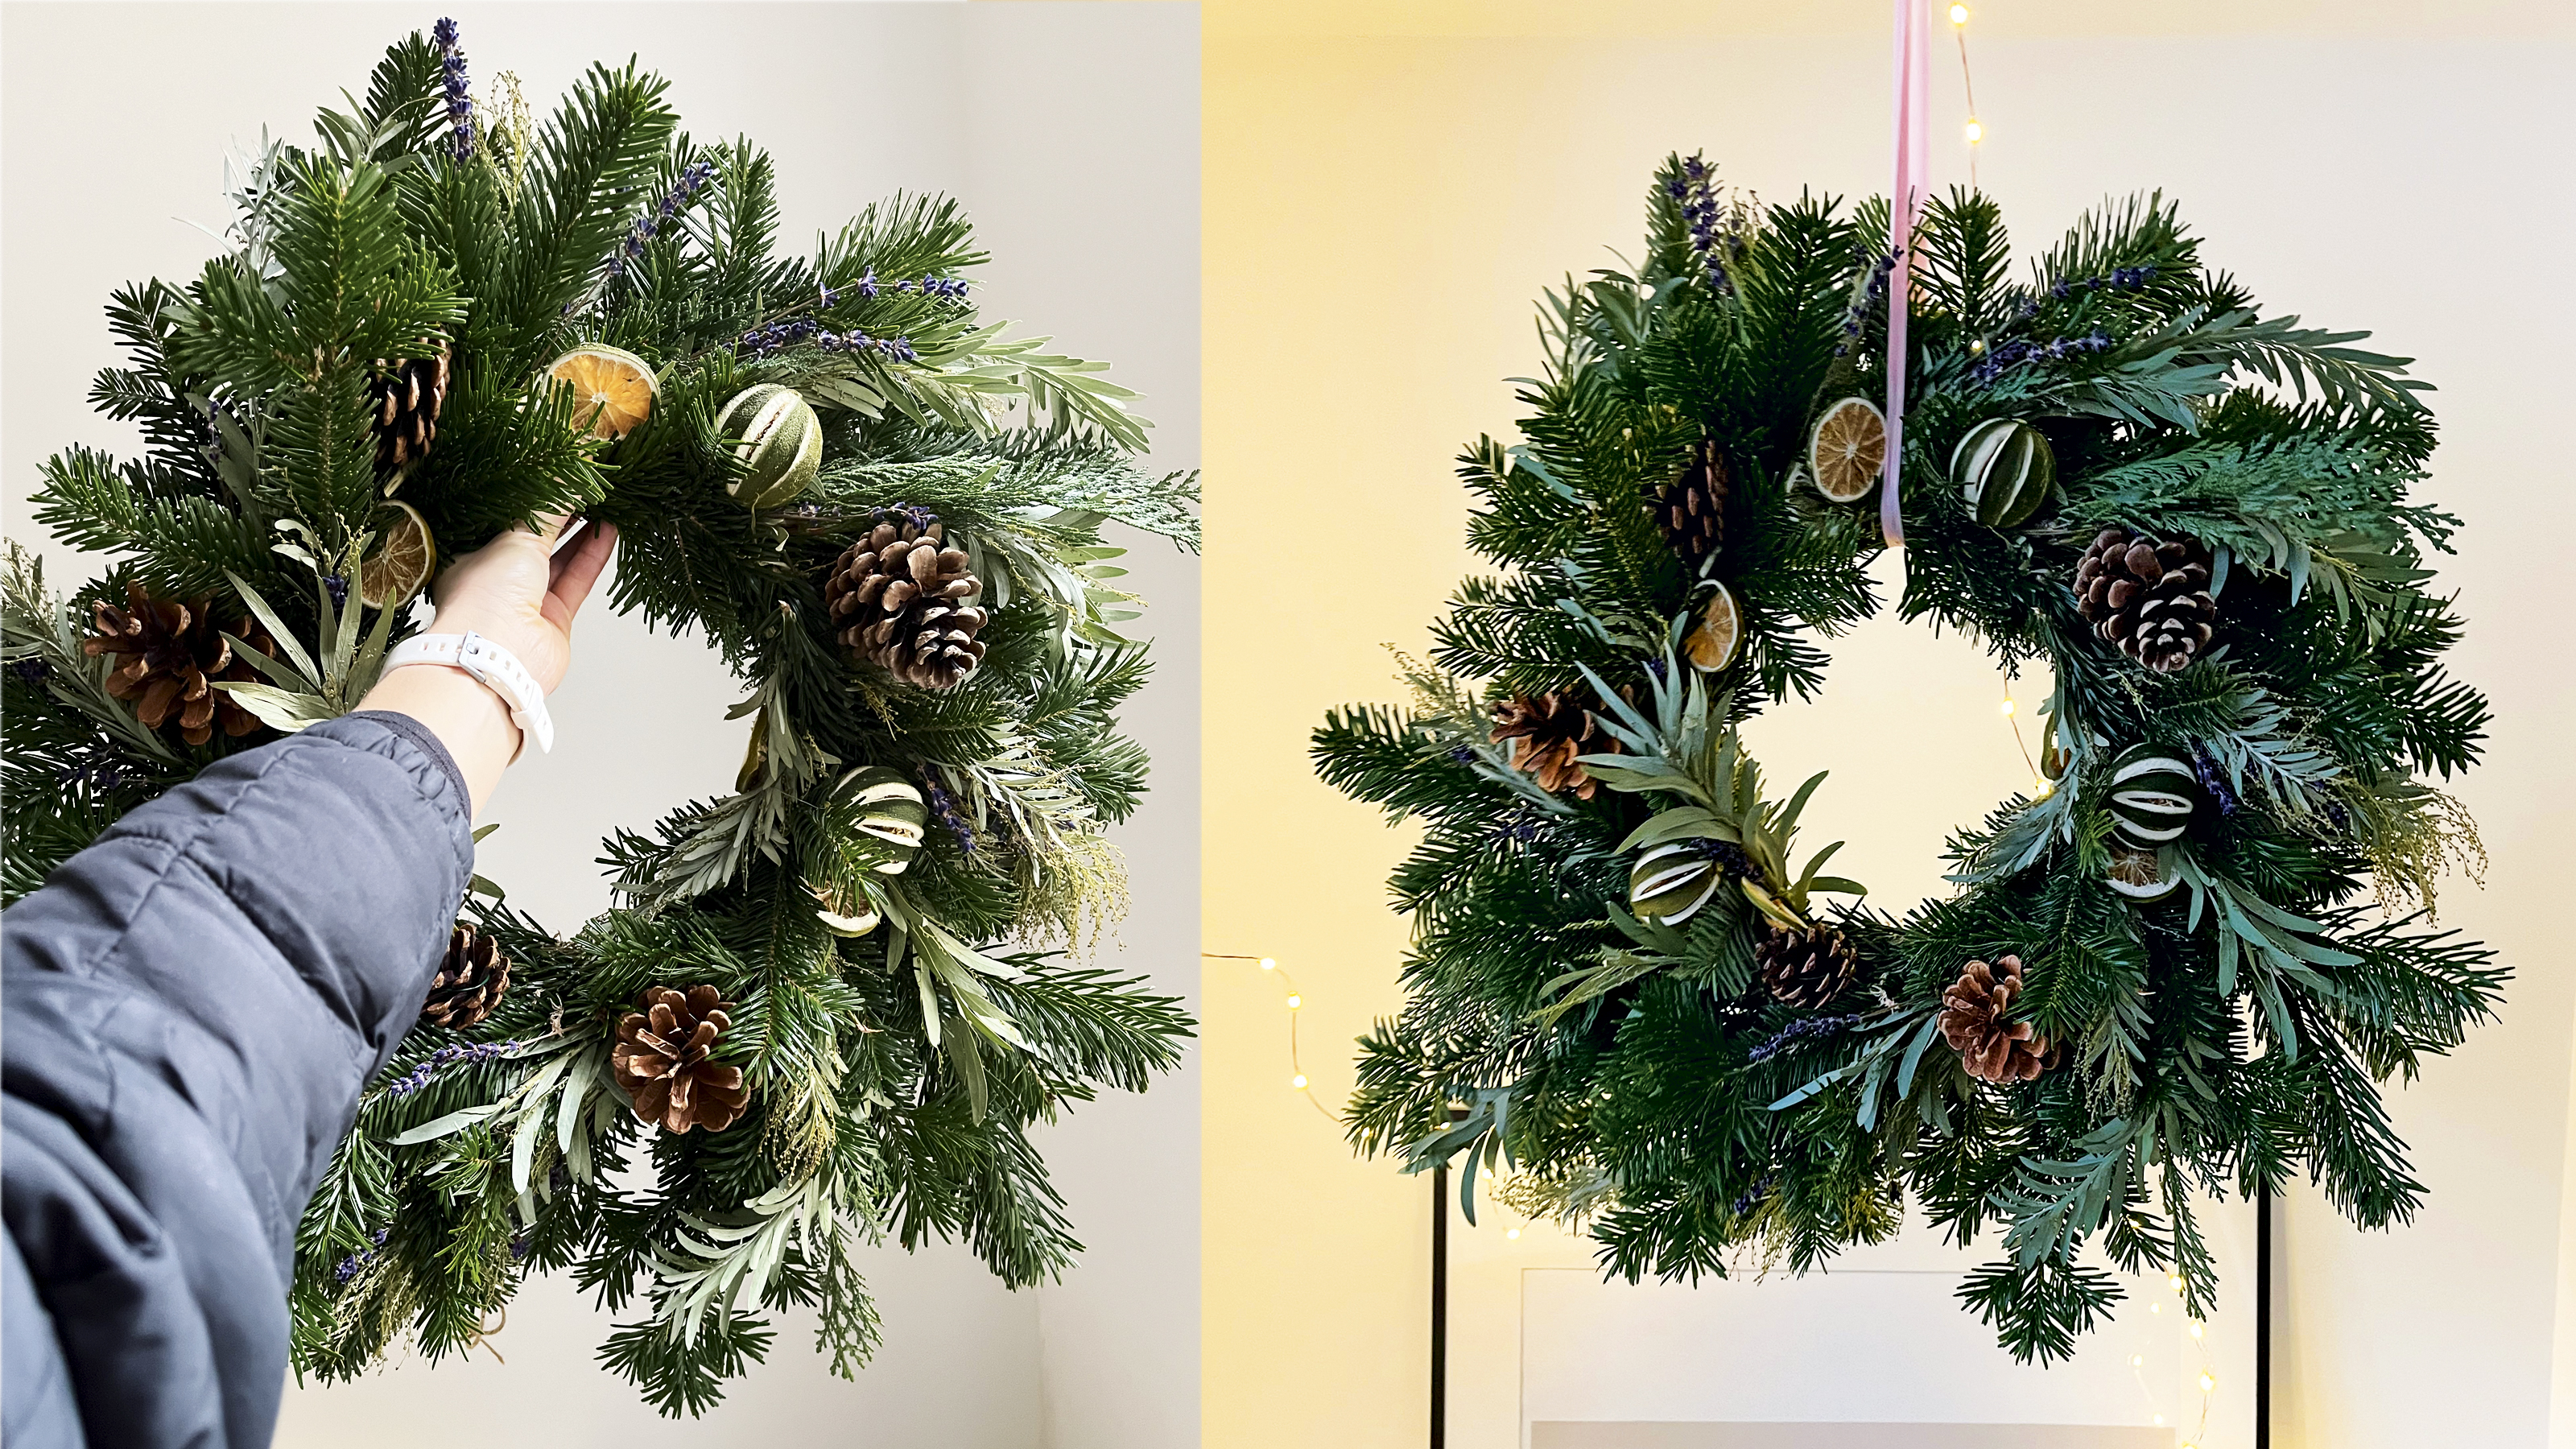 How to hang a wreath on a door (without damaging it)